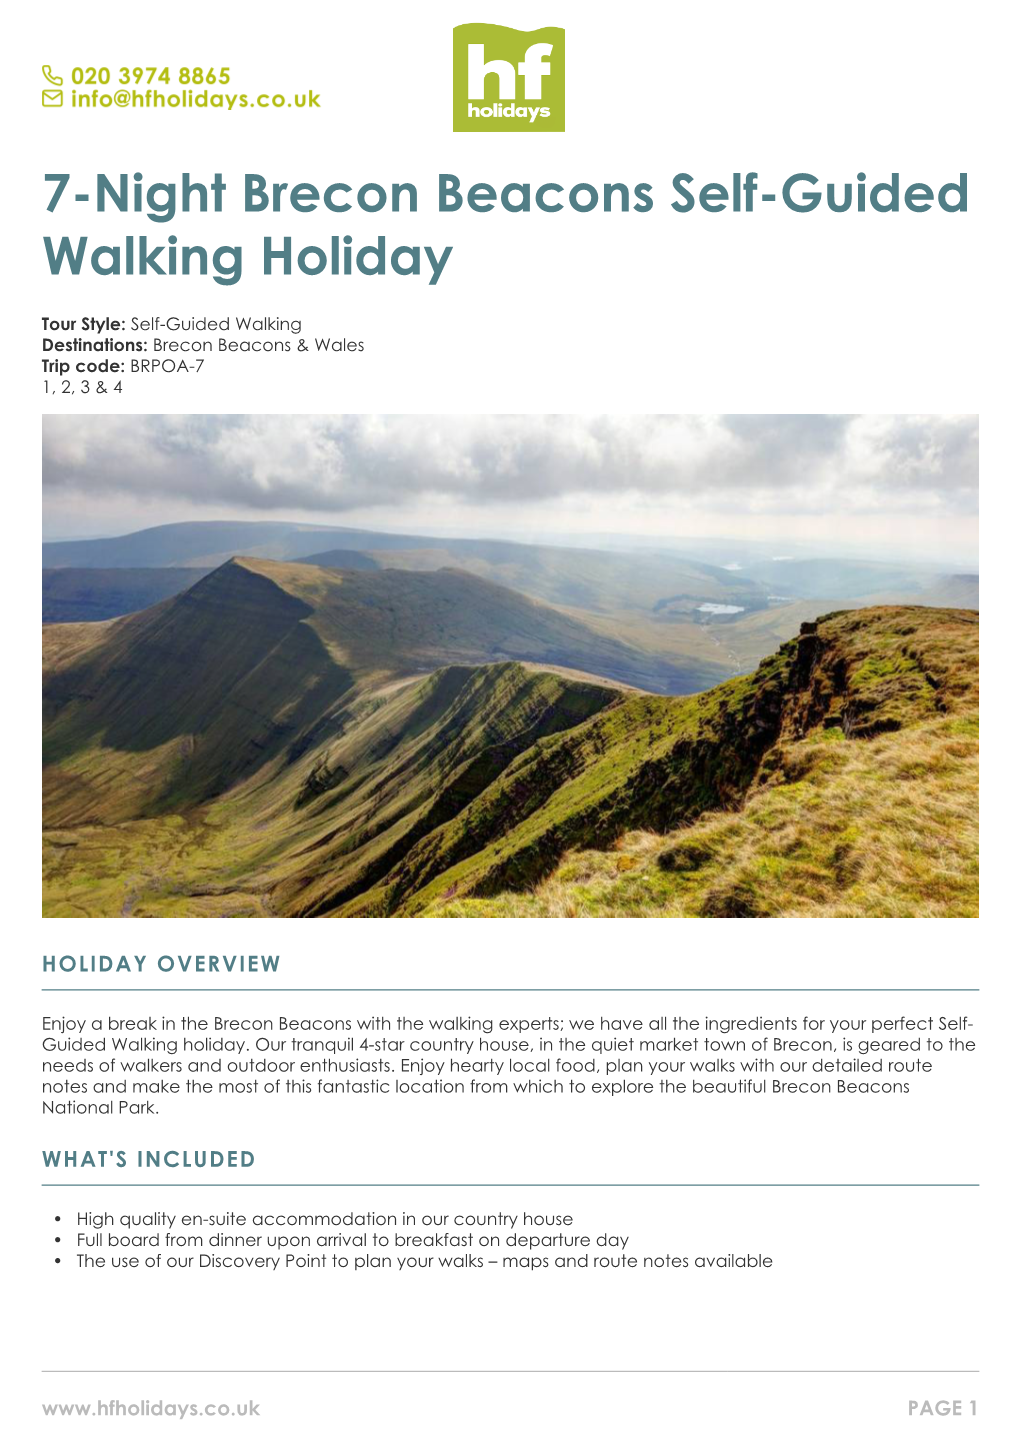 7-Night Brecon Beacons Self-Guided Walking Holiday